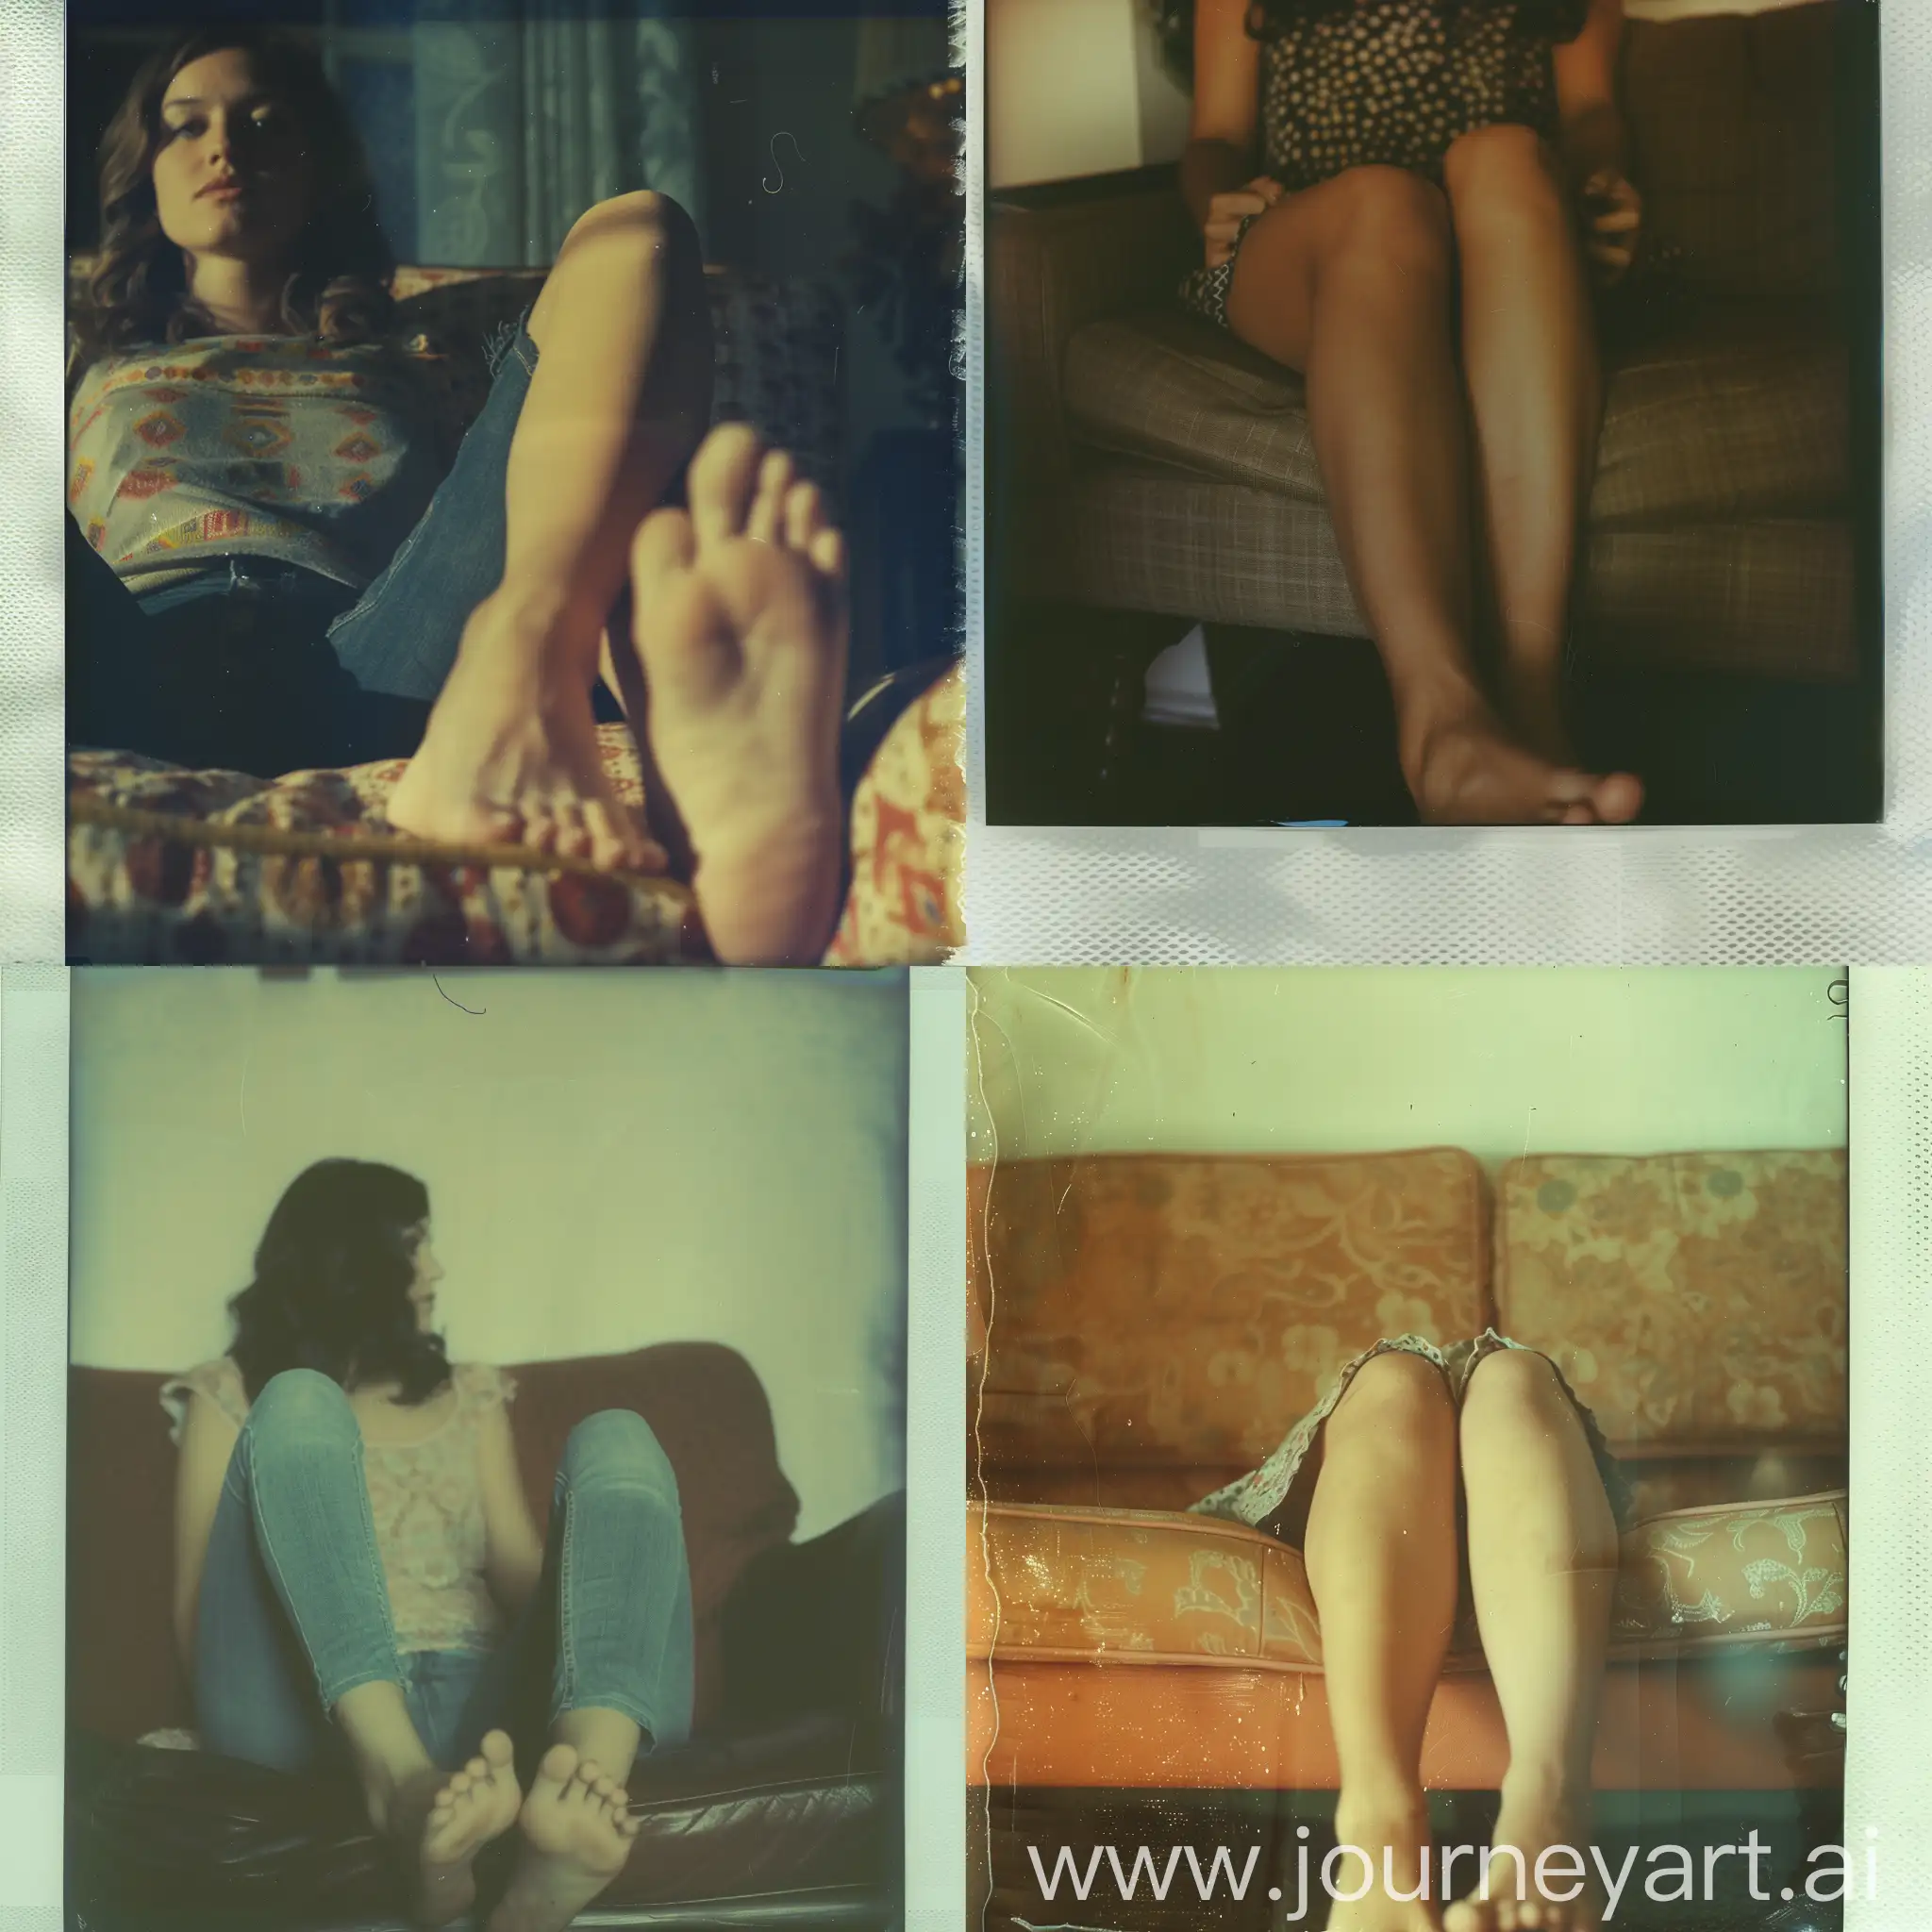 Girl-Sitting-on-Sofa-with-Feet-Showing-Holding-Polaroid